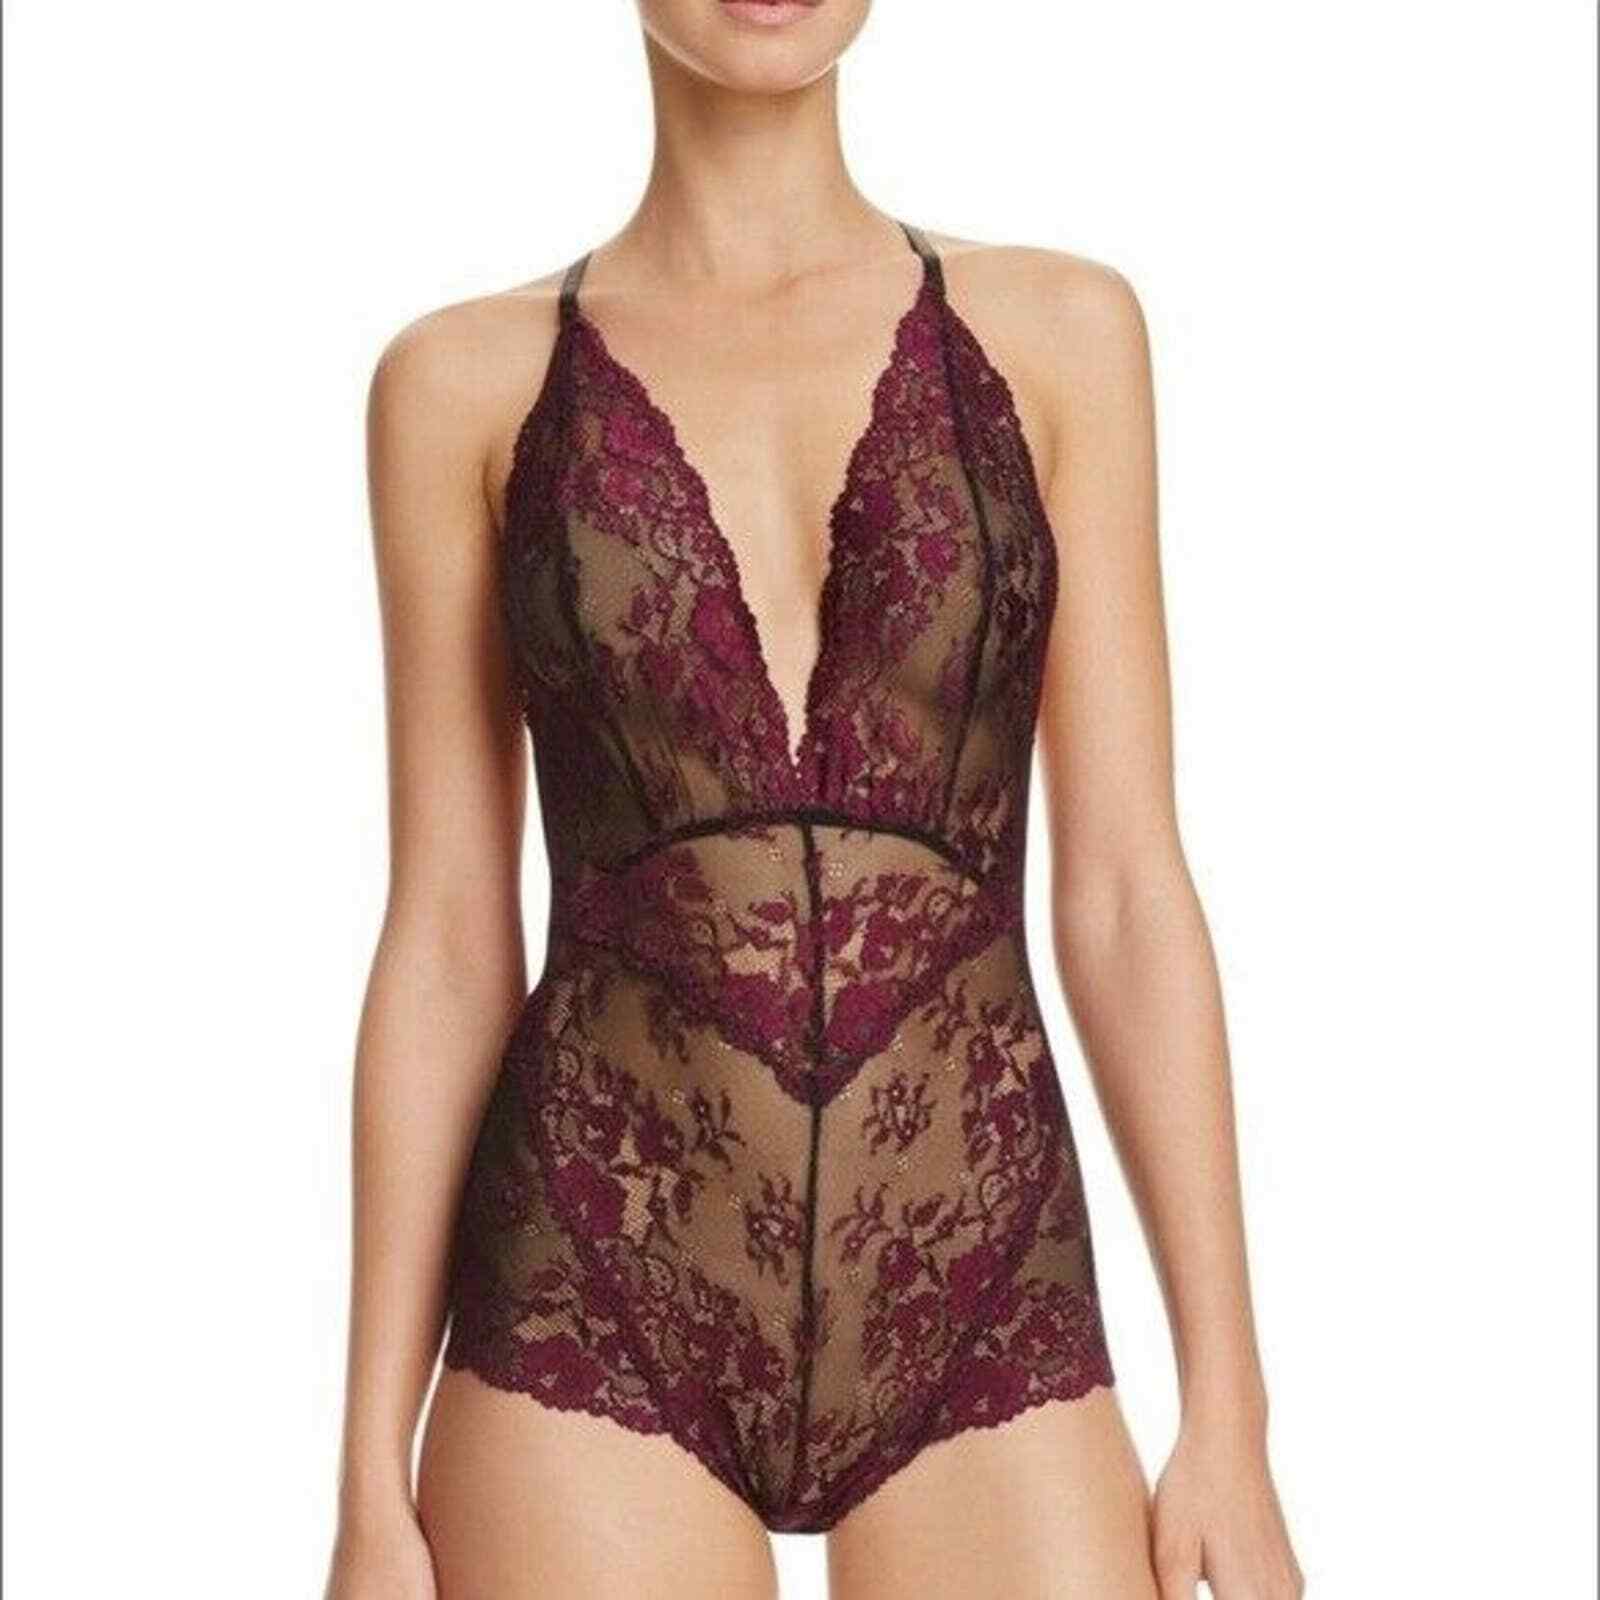 Free People Max Max 87% OFF 72% OFF Too Cute To Handle Bodysuit Sheer Fuschia Lace Black